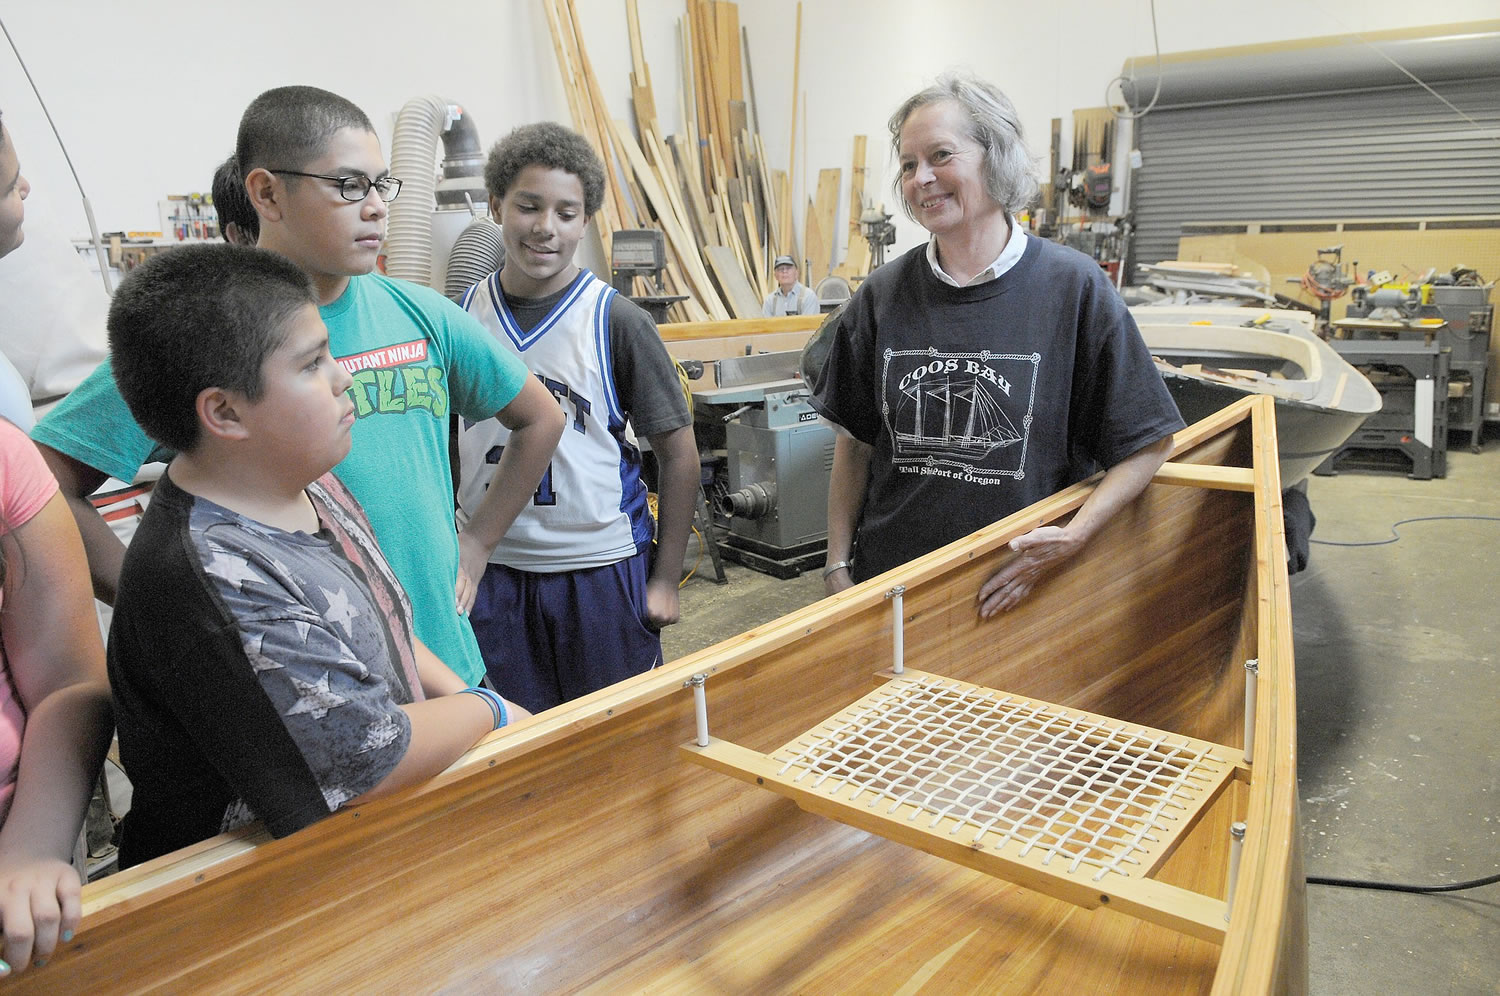 Sarah Reckon, a volunteer at the Coos Bay Boat Building Center in Coos Bay, Ore., takes seventh-graders from Sunset Middle School on a facilities tour on Nov. 6. The school is pairing with the center for a boat-building project.